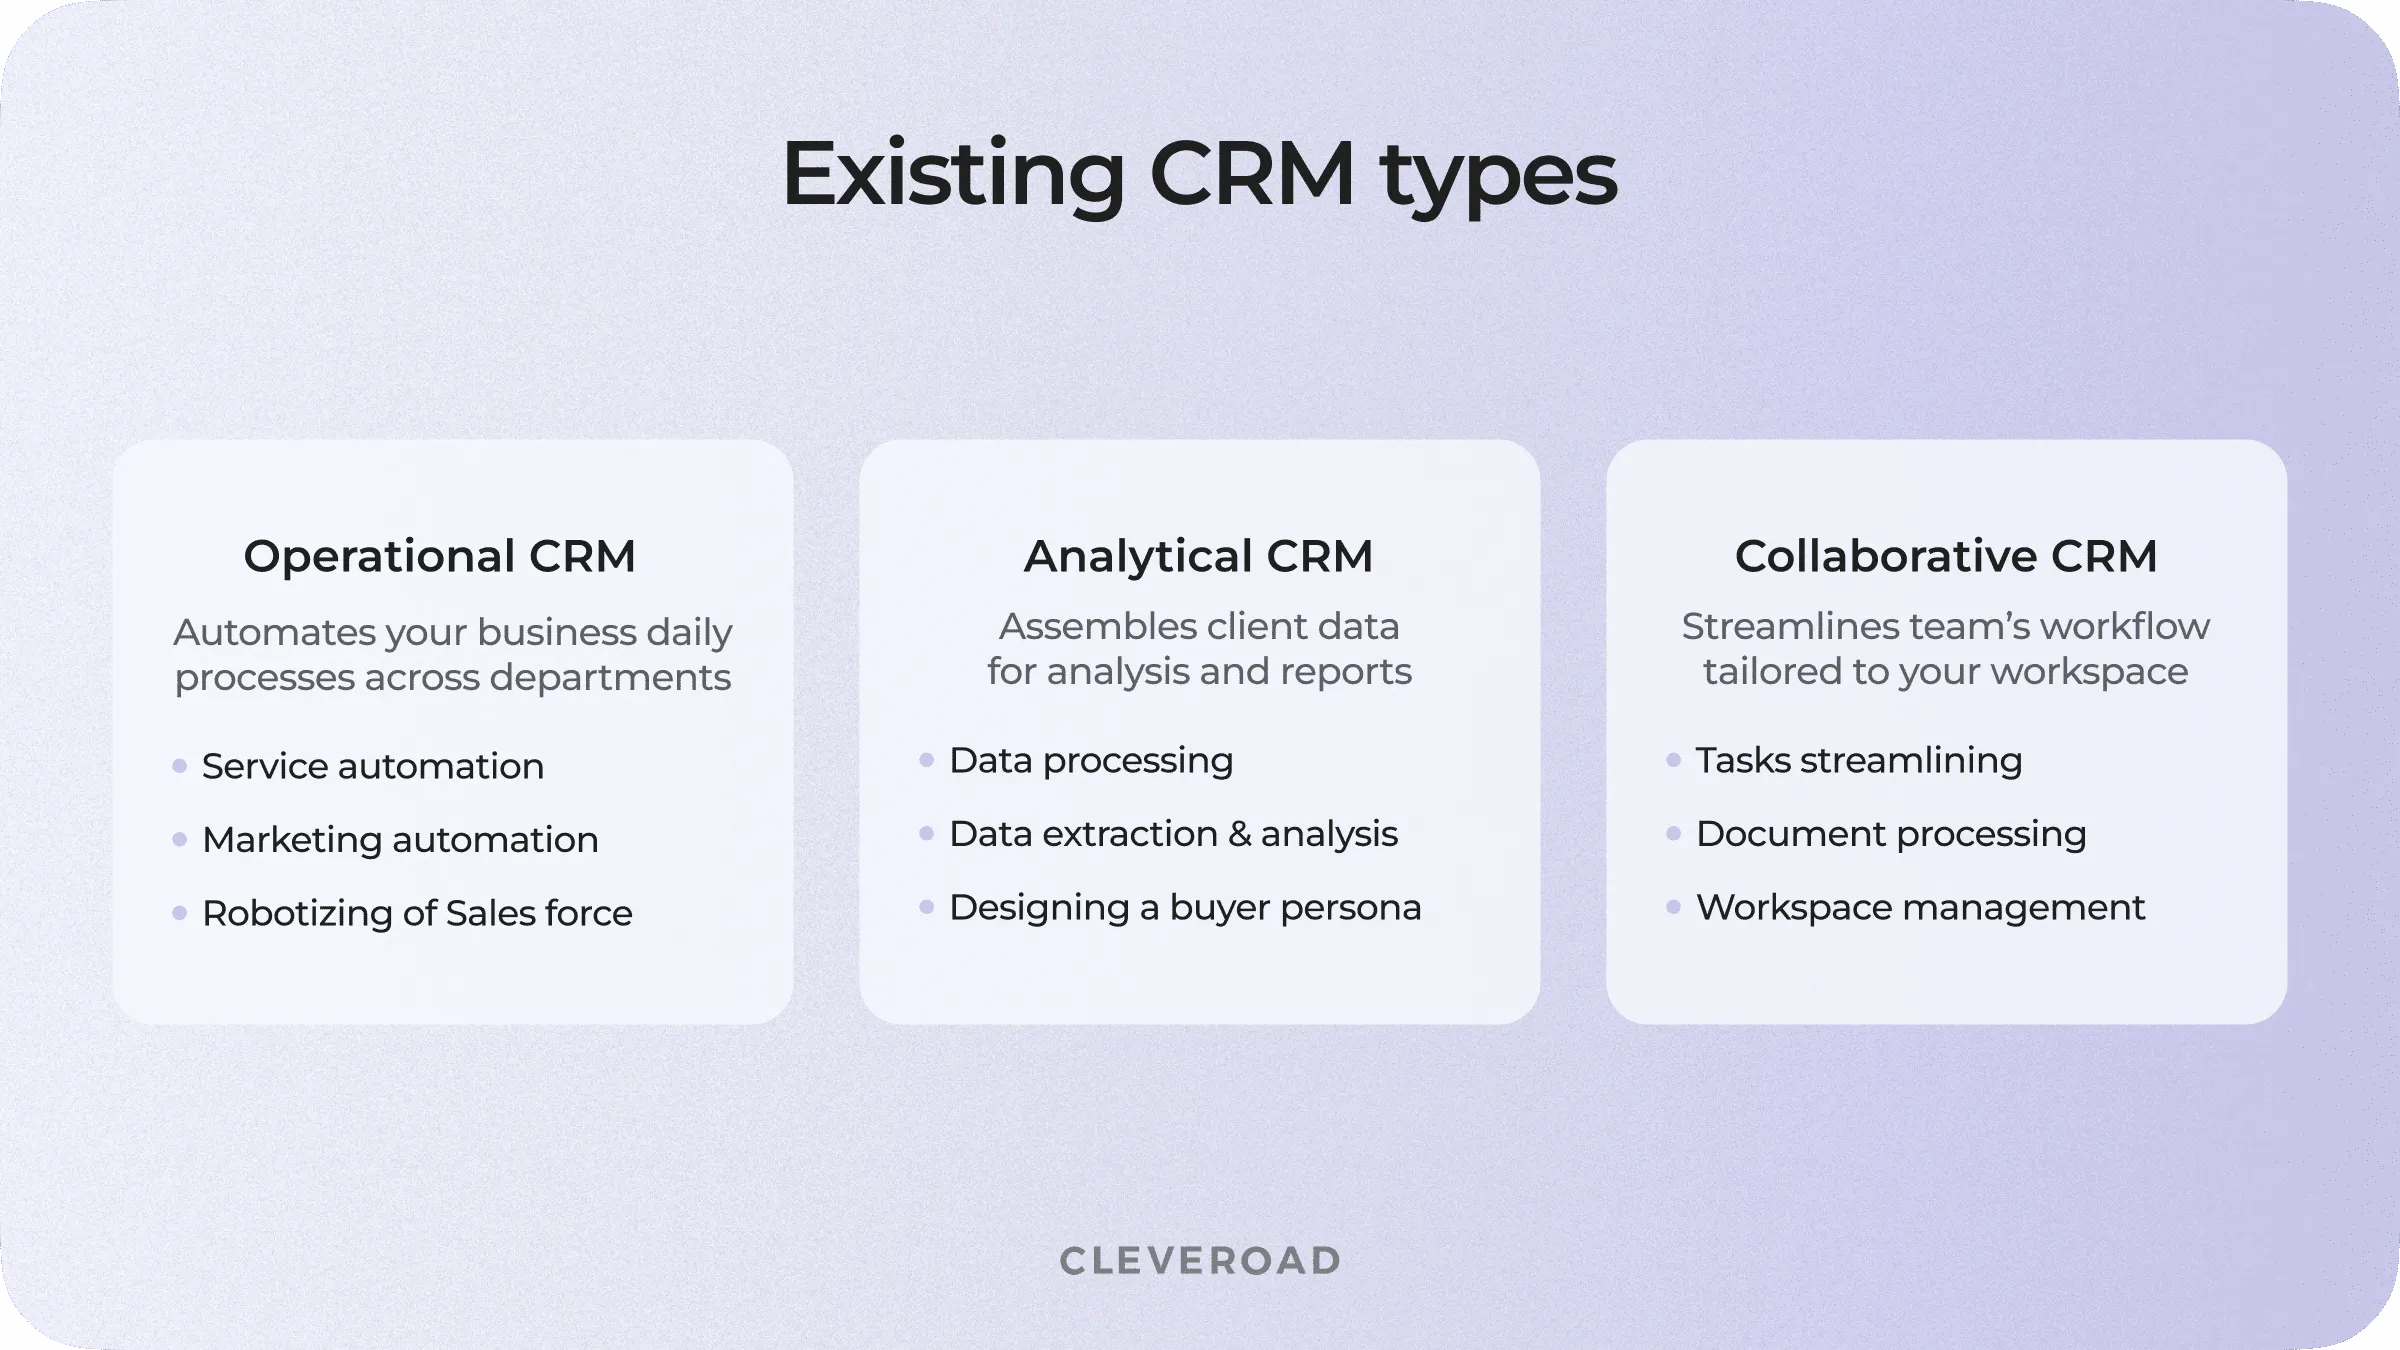 CRM types and purposes